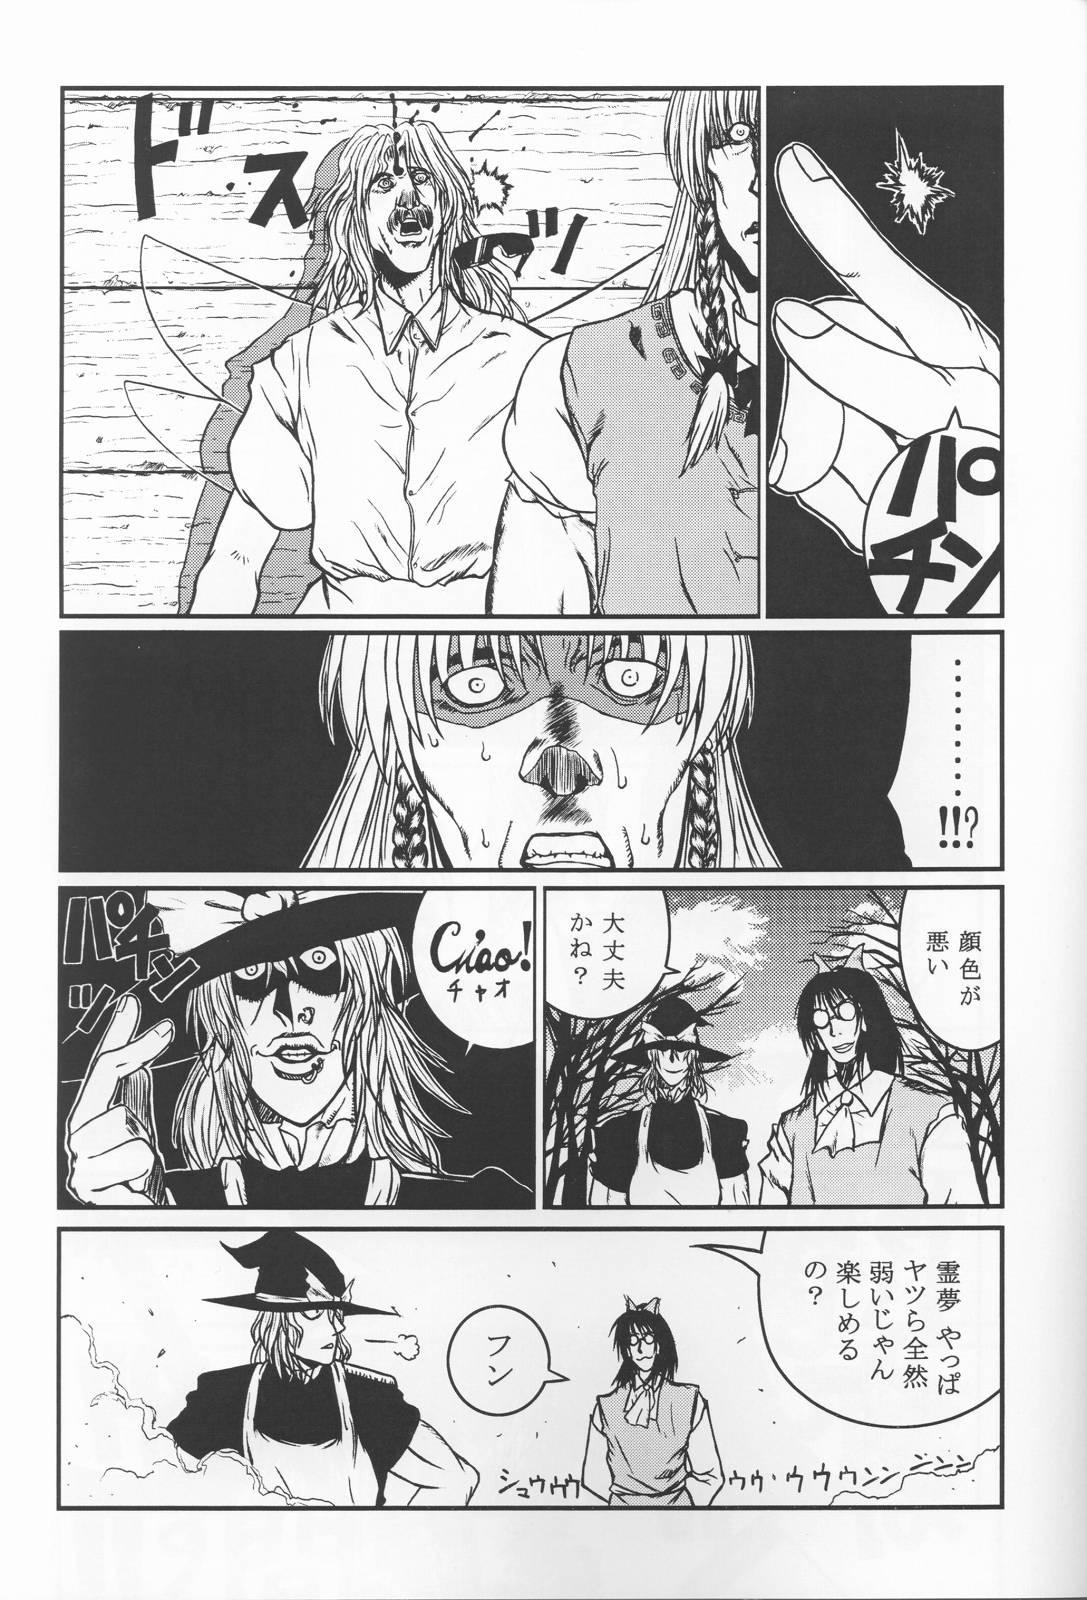 Fuck For Cash HELLSING？ - Touhou project Blowjobs - Page 8